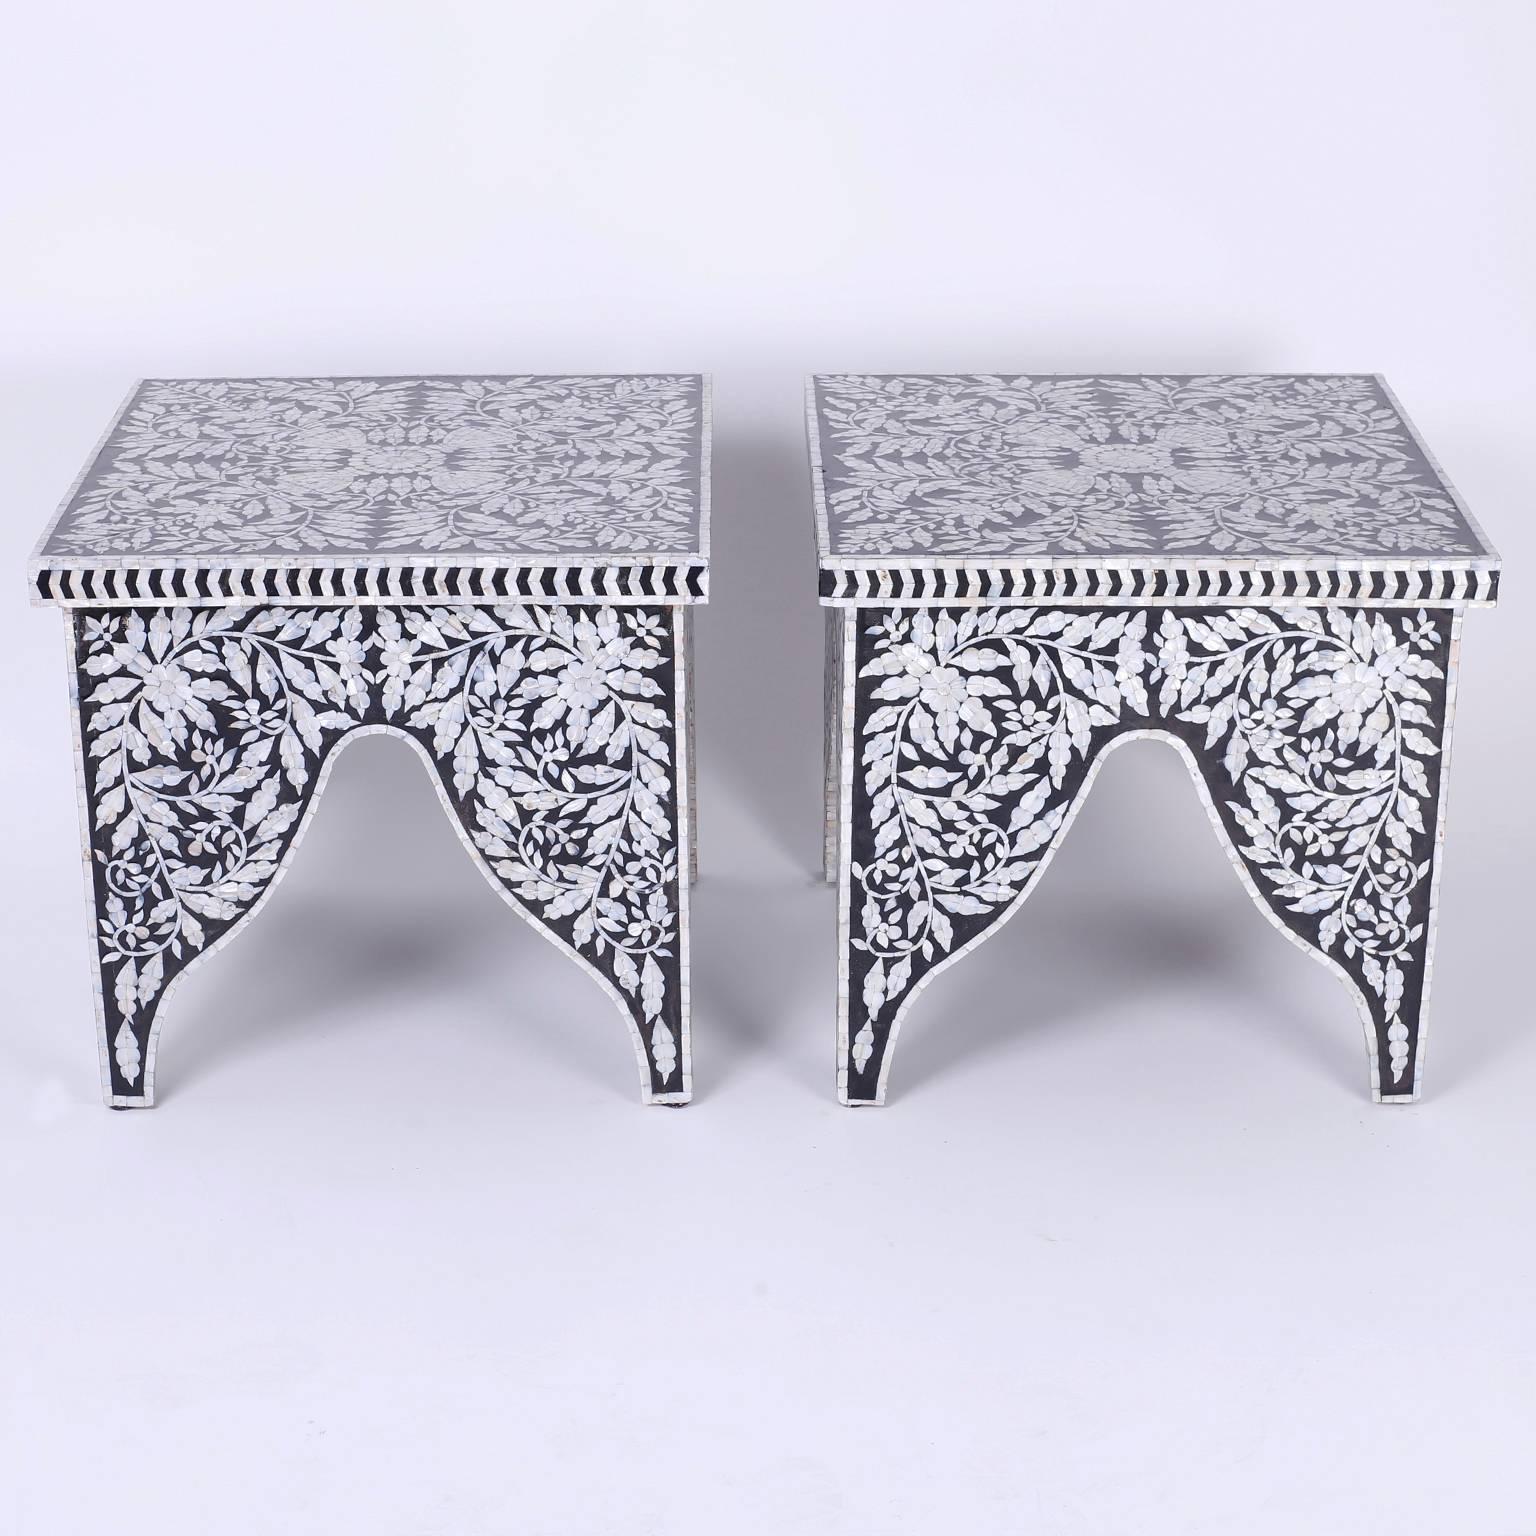 Rare pair of midcentury Anglo-Indian tables that can function as end or occasional tables. The square tops are decorated with a delightful and elaborate floral design as are the bases, which feature alternating architectural arches.